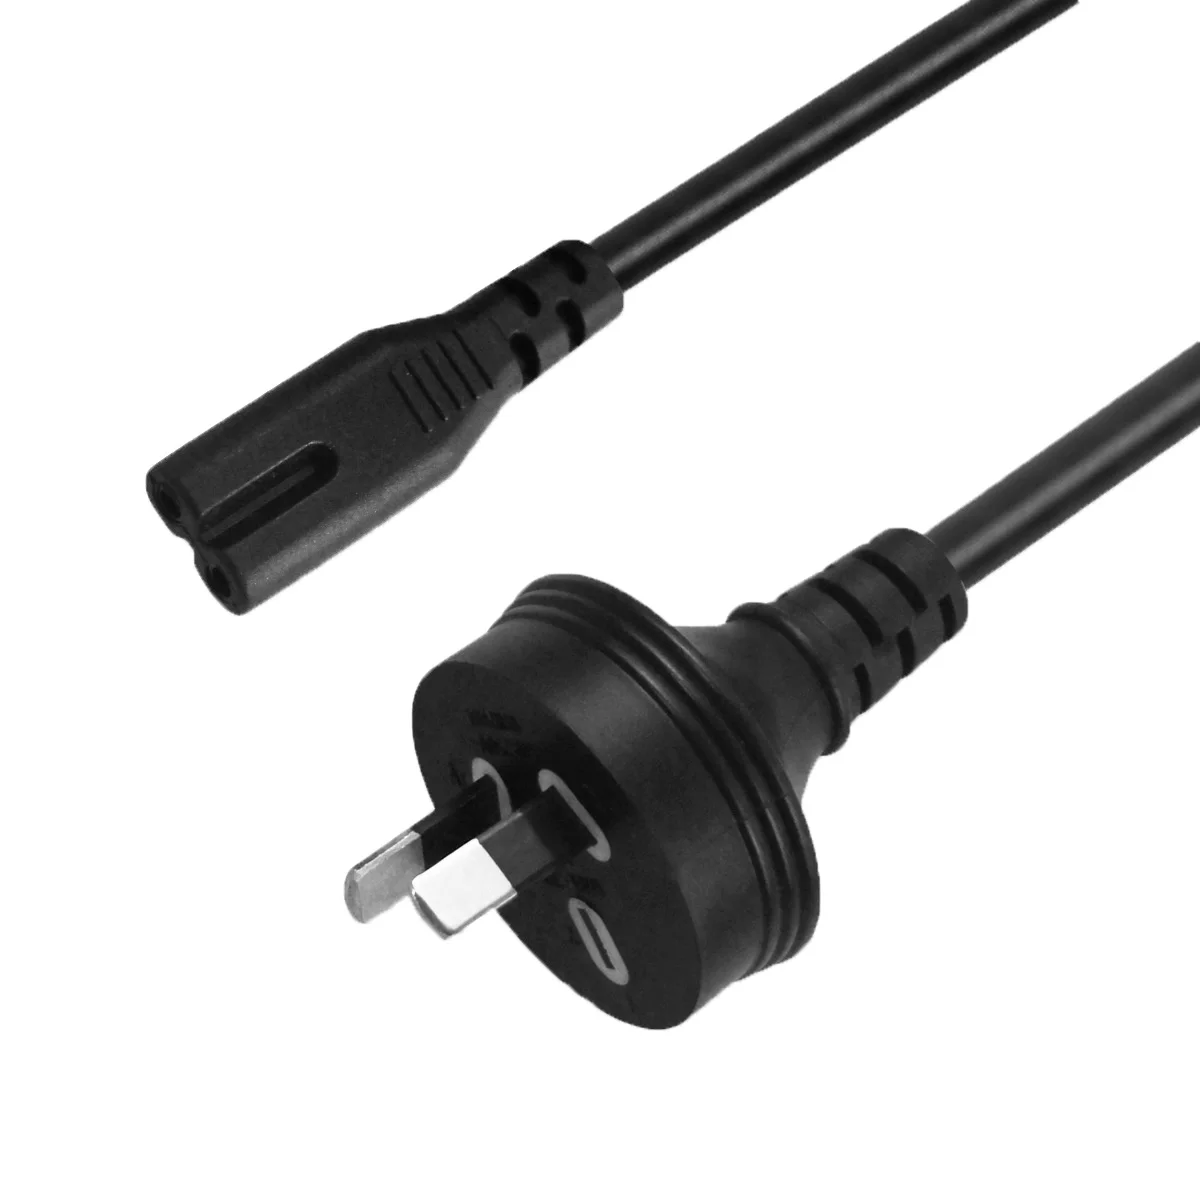 Power Cord AC Plug To Iec 320 C14 Male PC Cable 23